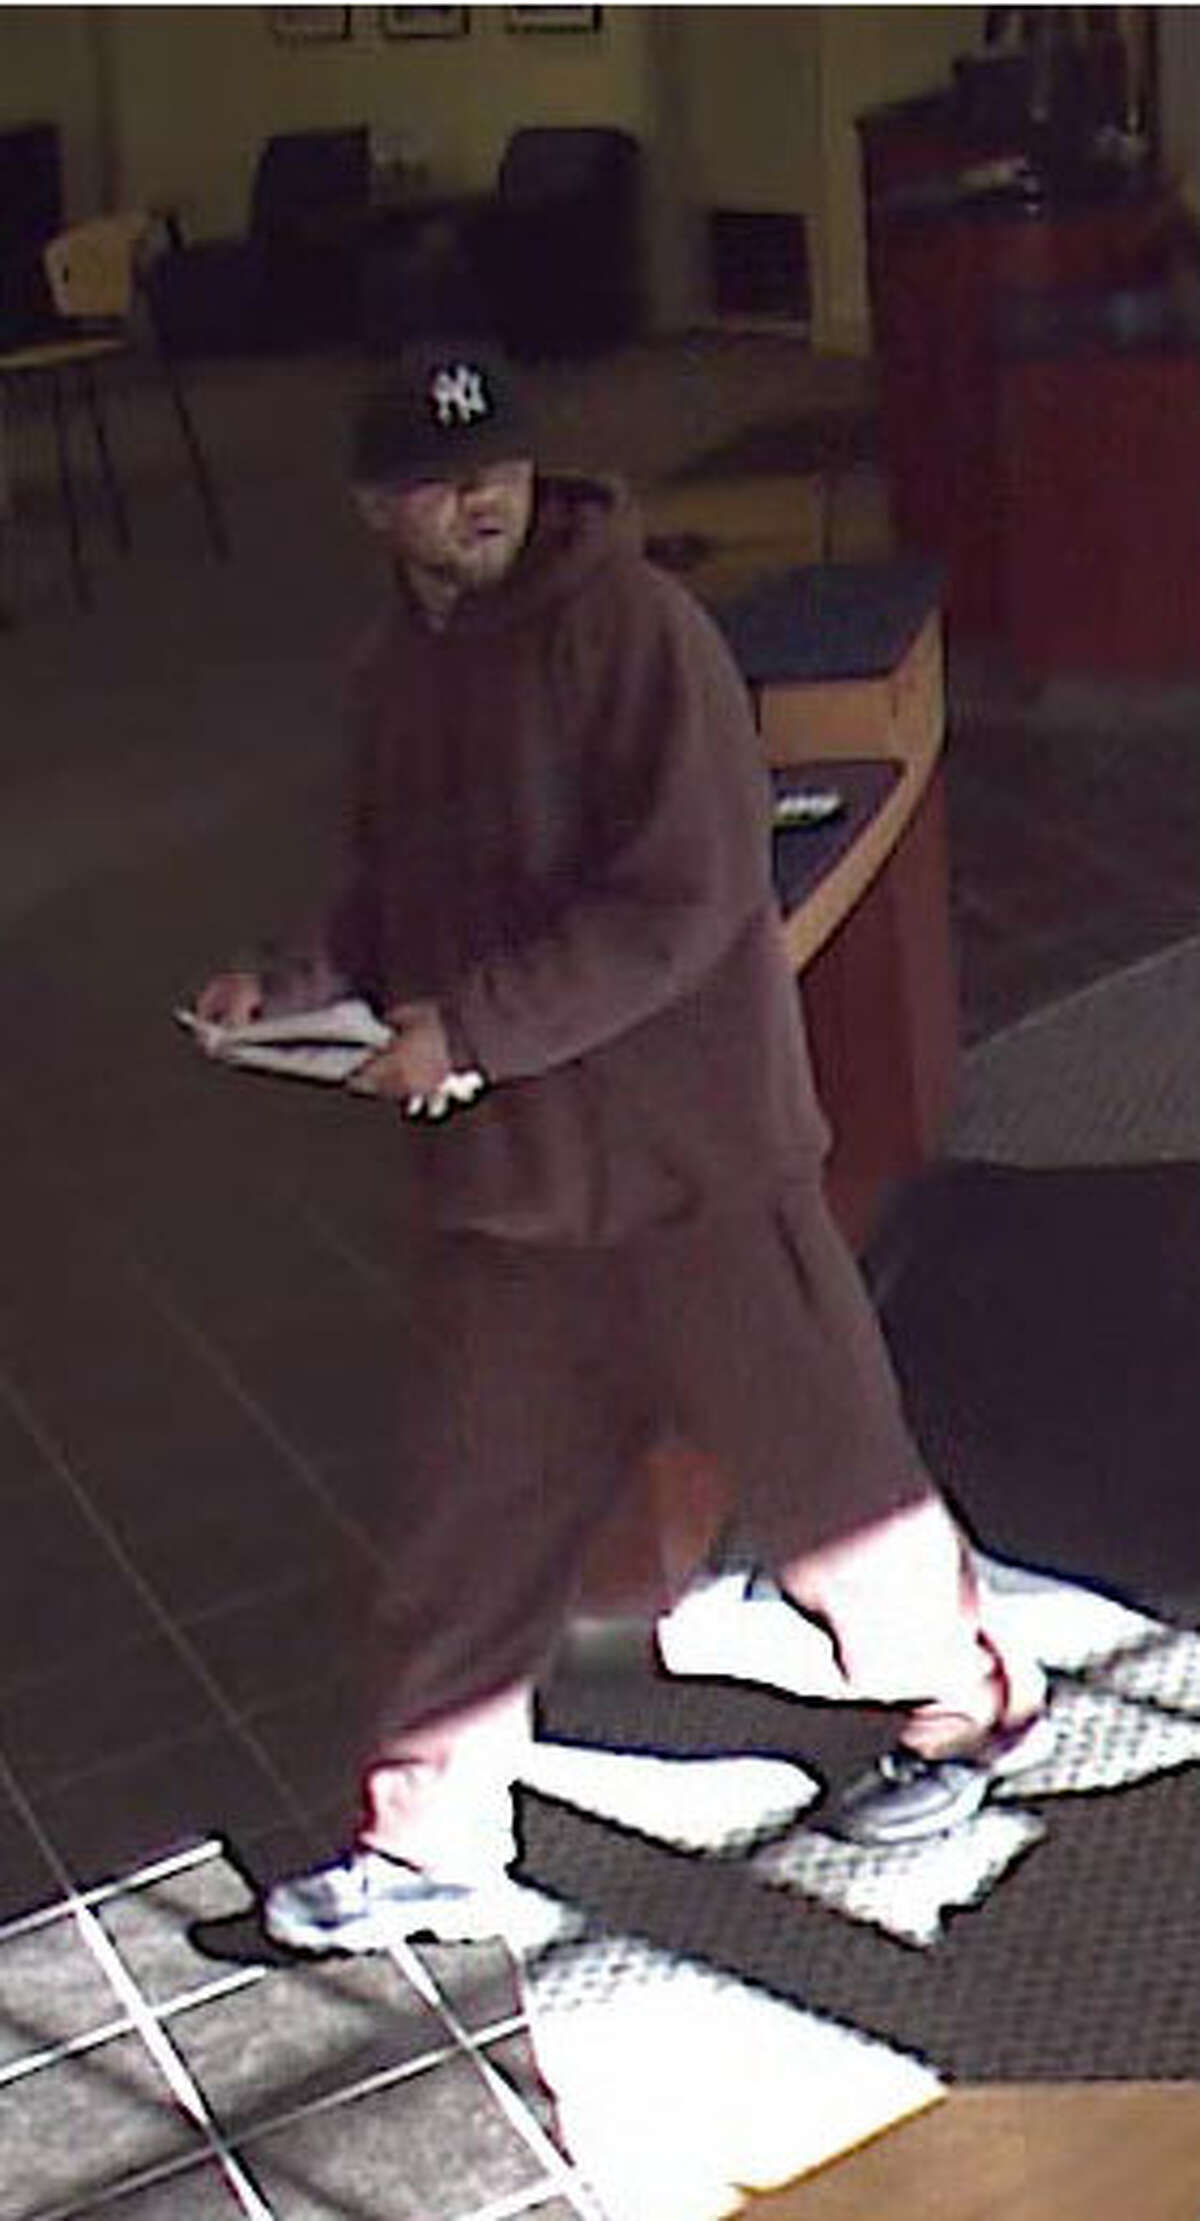 Greenwich Police are searching for this man, who is suspected of robbing the People's United Bank at the bottom of Greenwich Avenue on Saturday morning, Nov. 5, 2011.